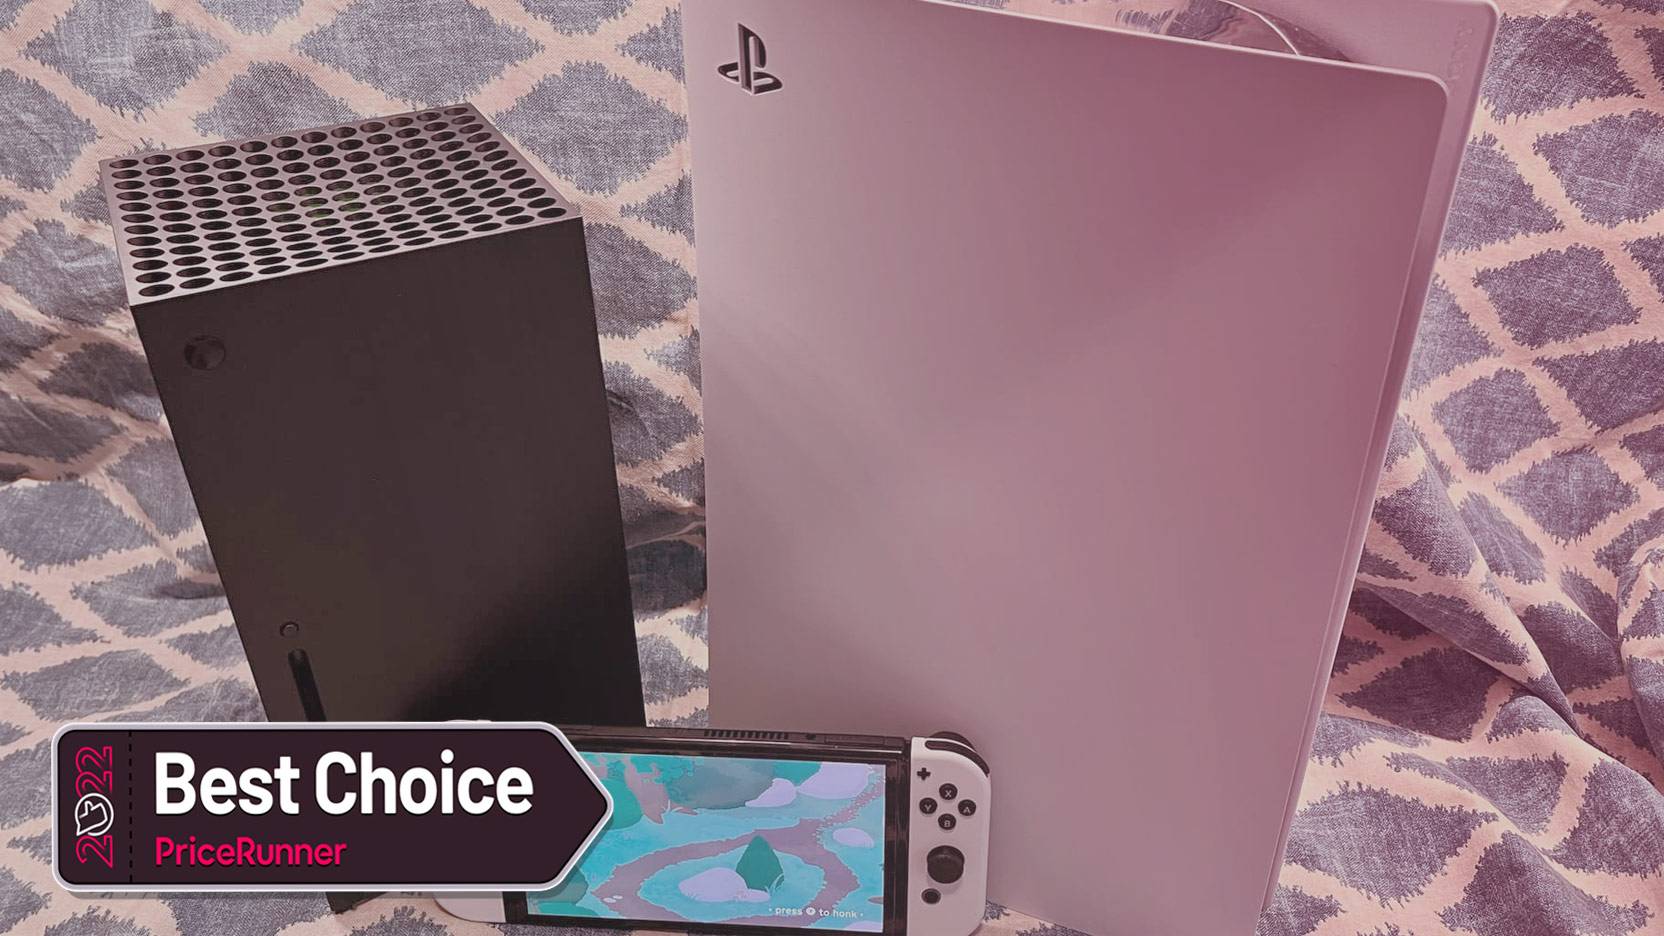 skammel pust sanger Top 9 Best Game consoles of 2022 → Reviewed & Ranked